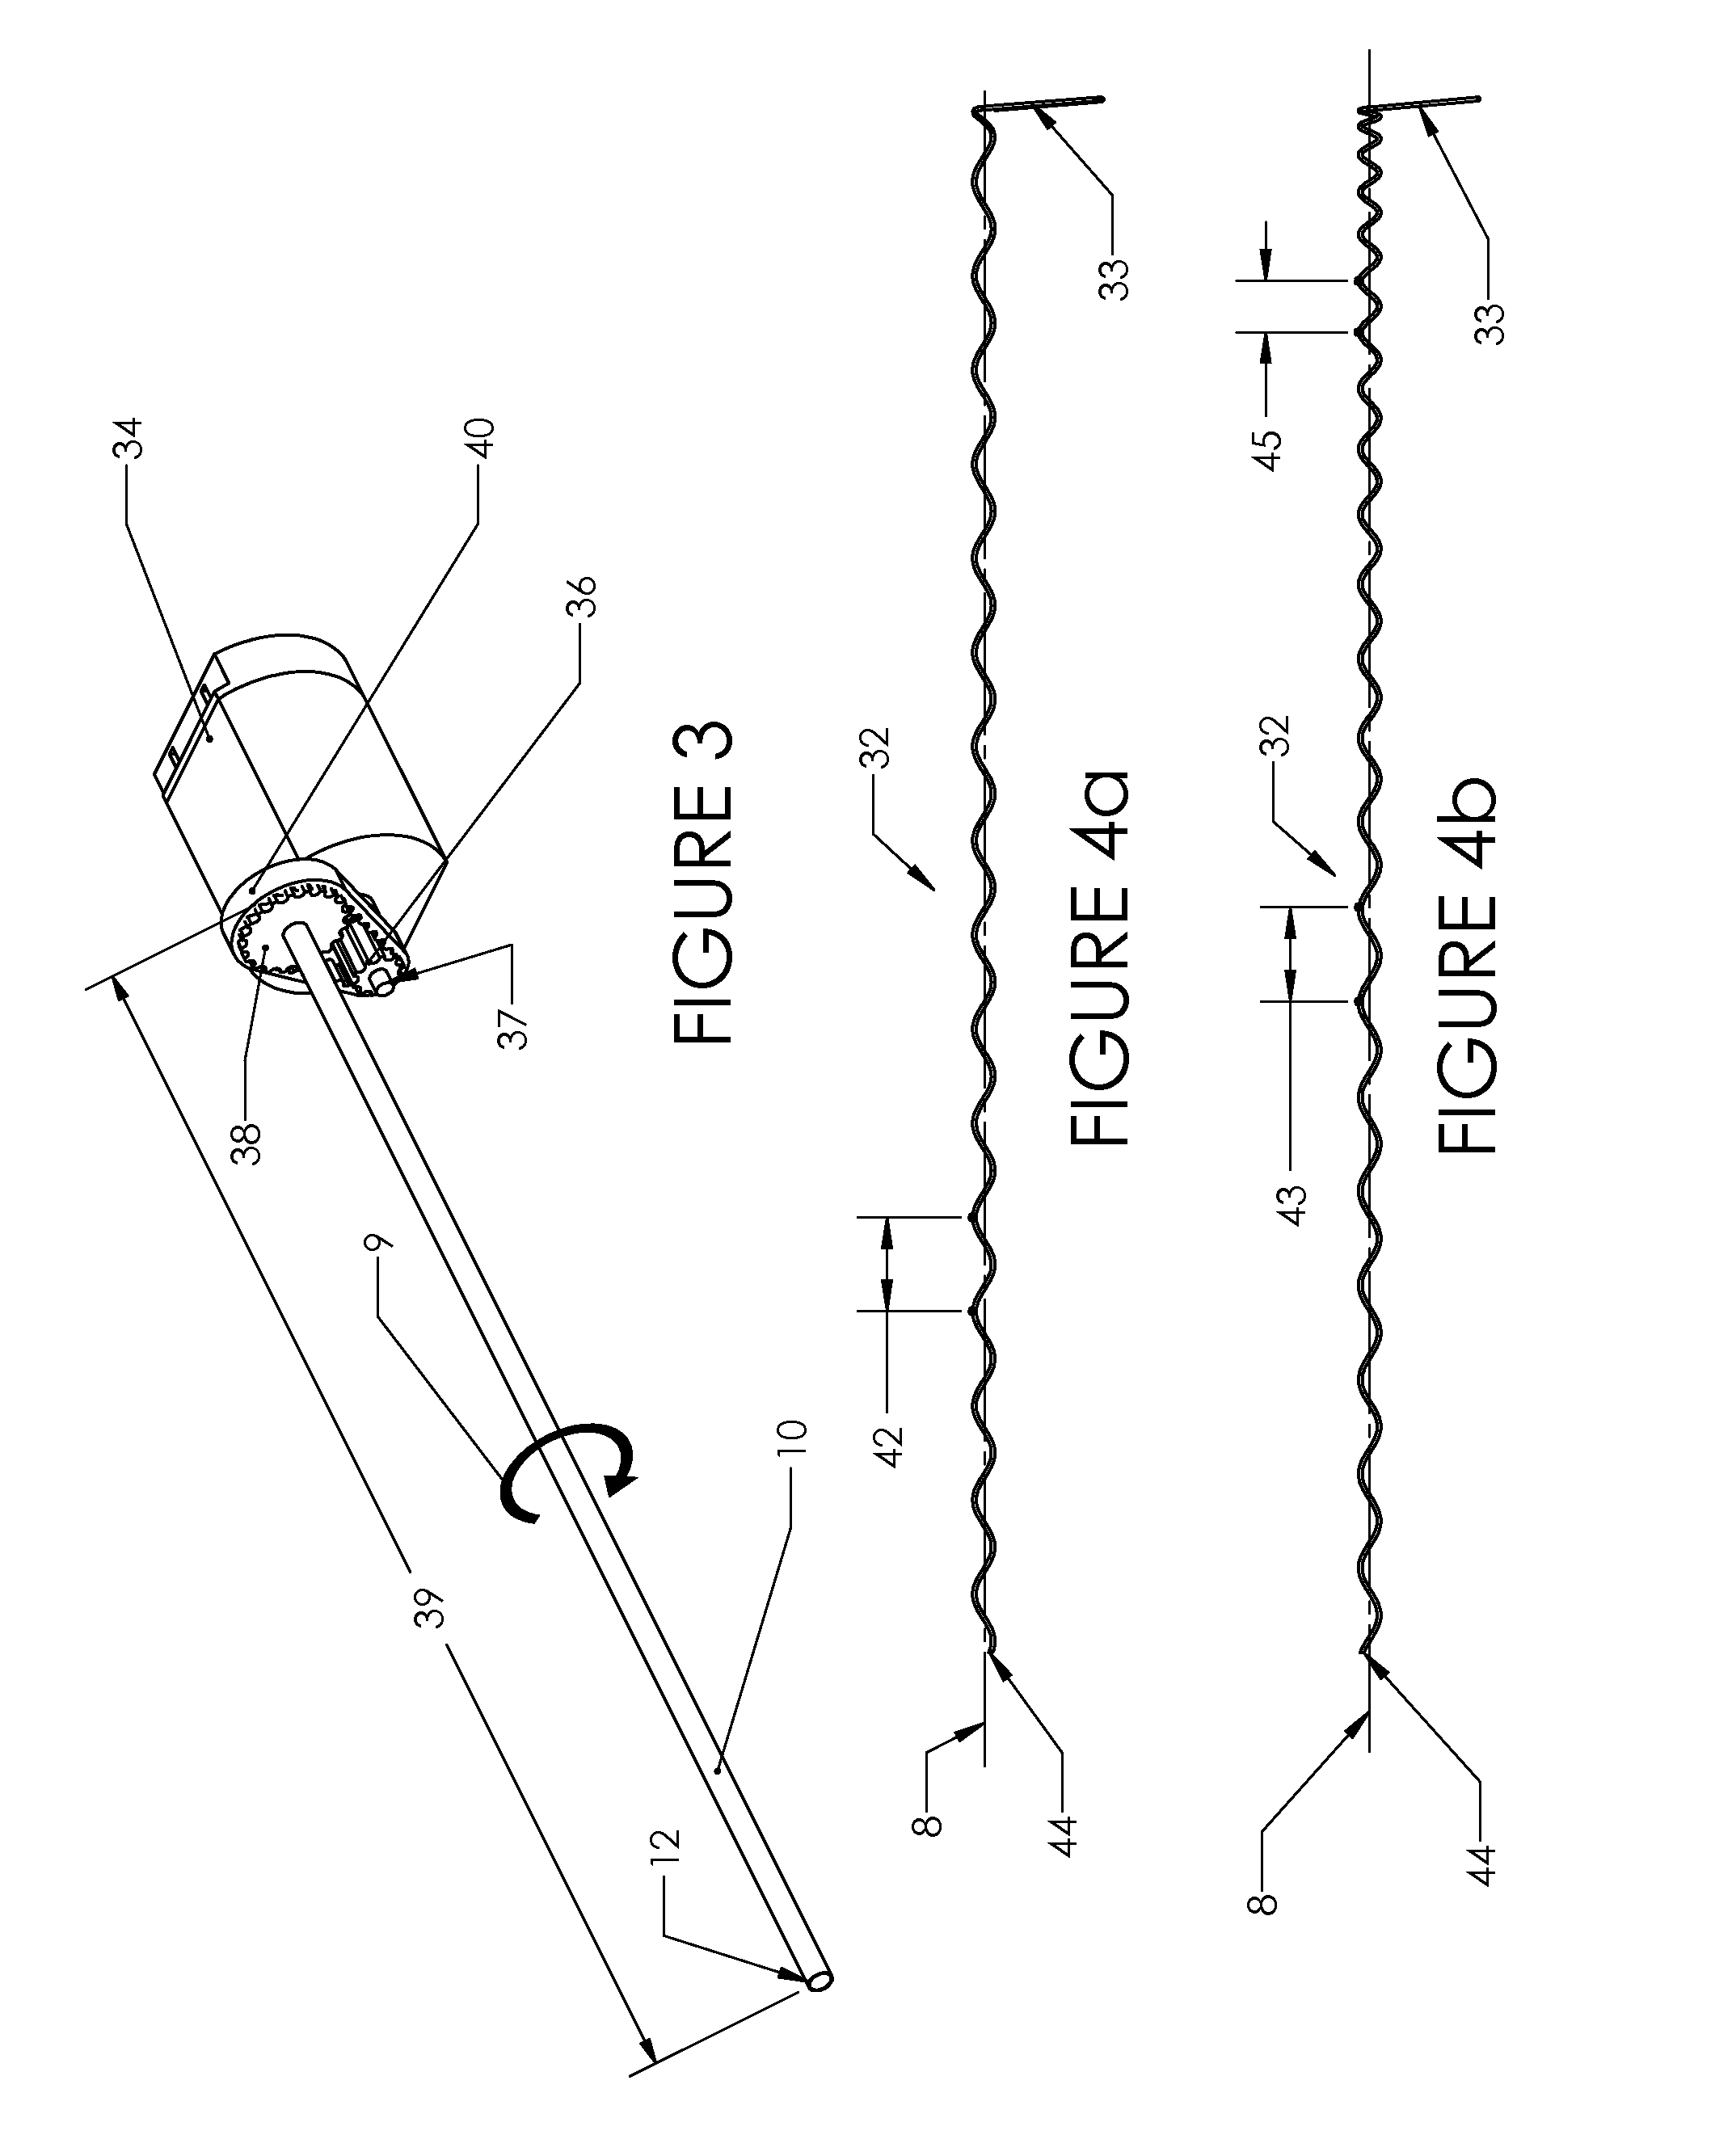 Tissue removal device and method of use